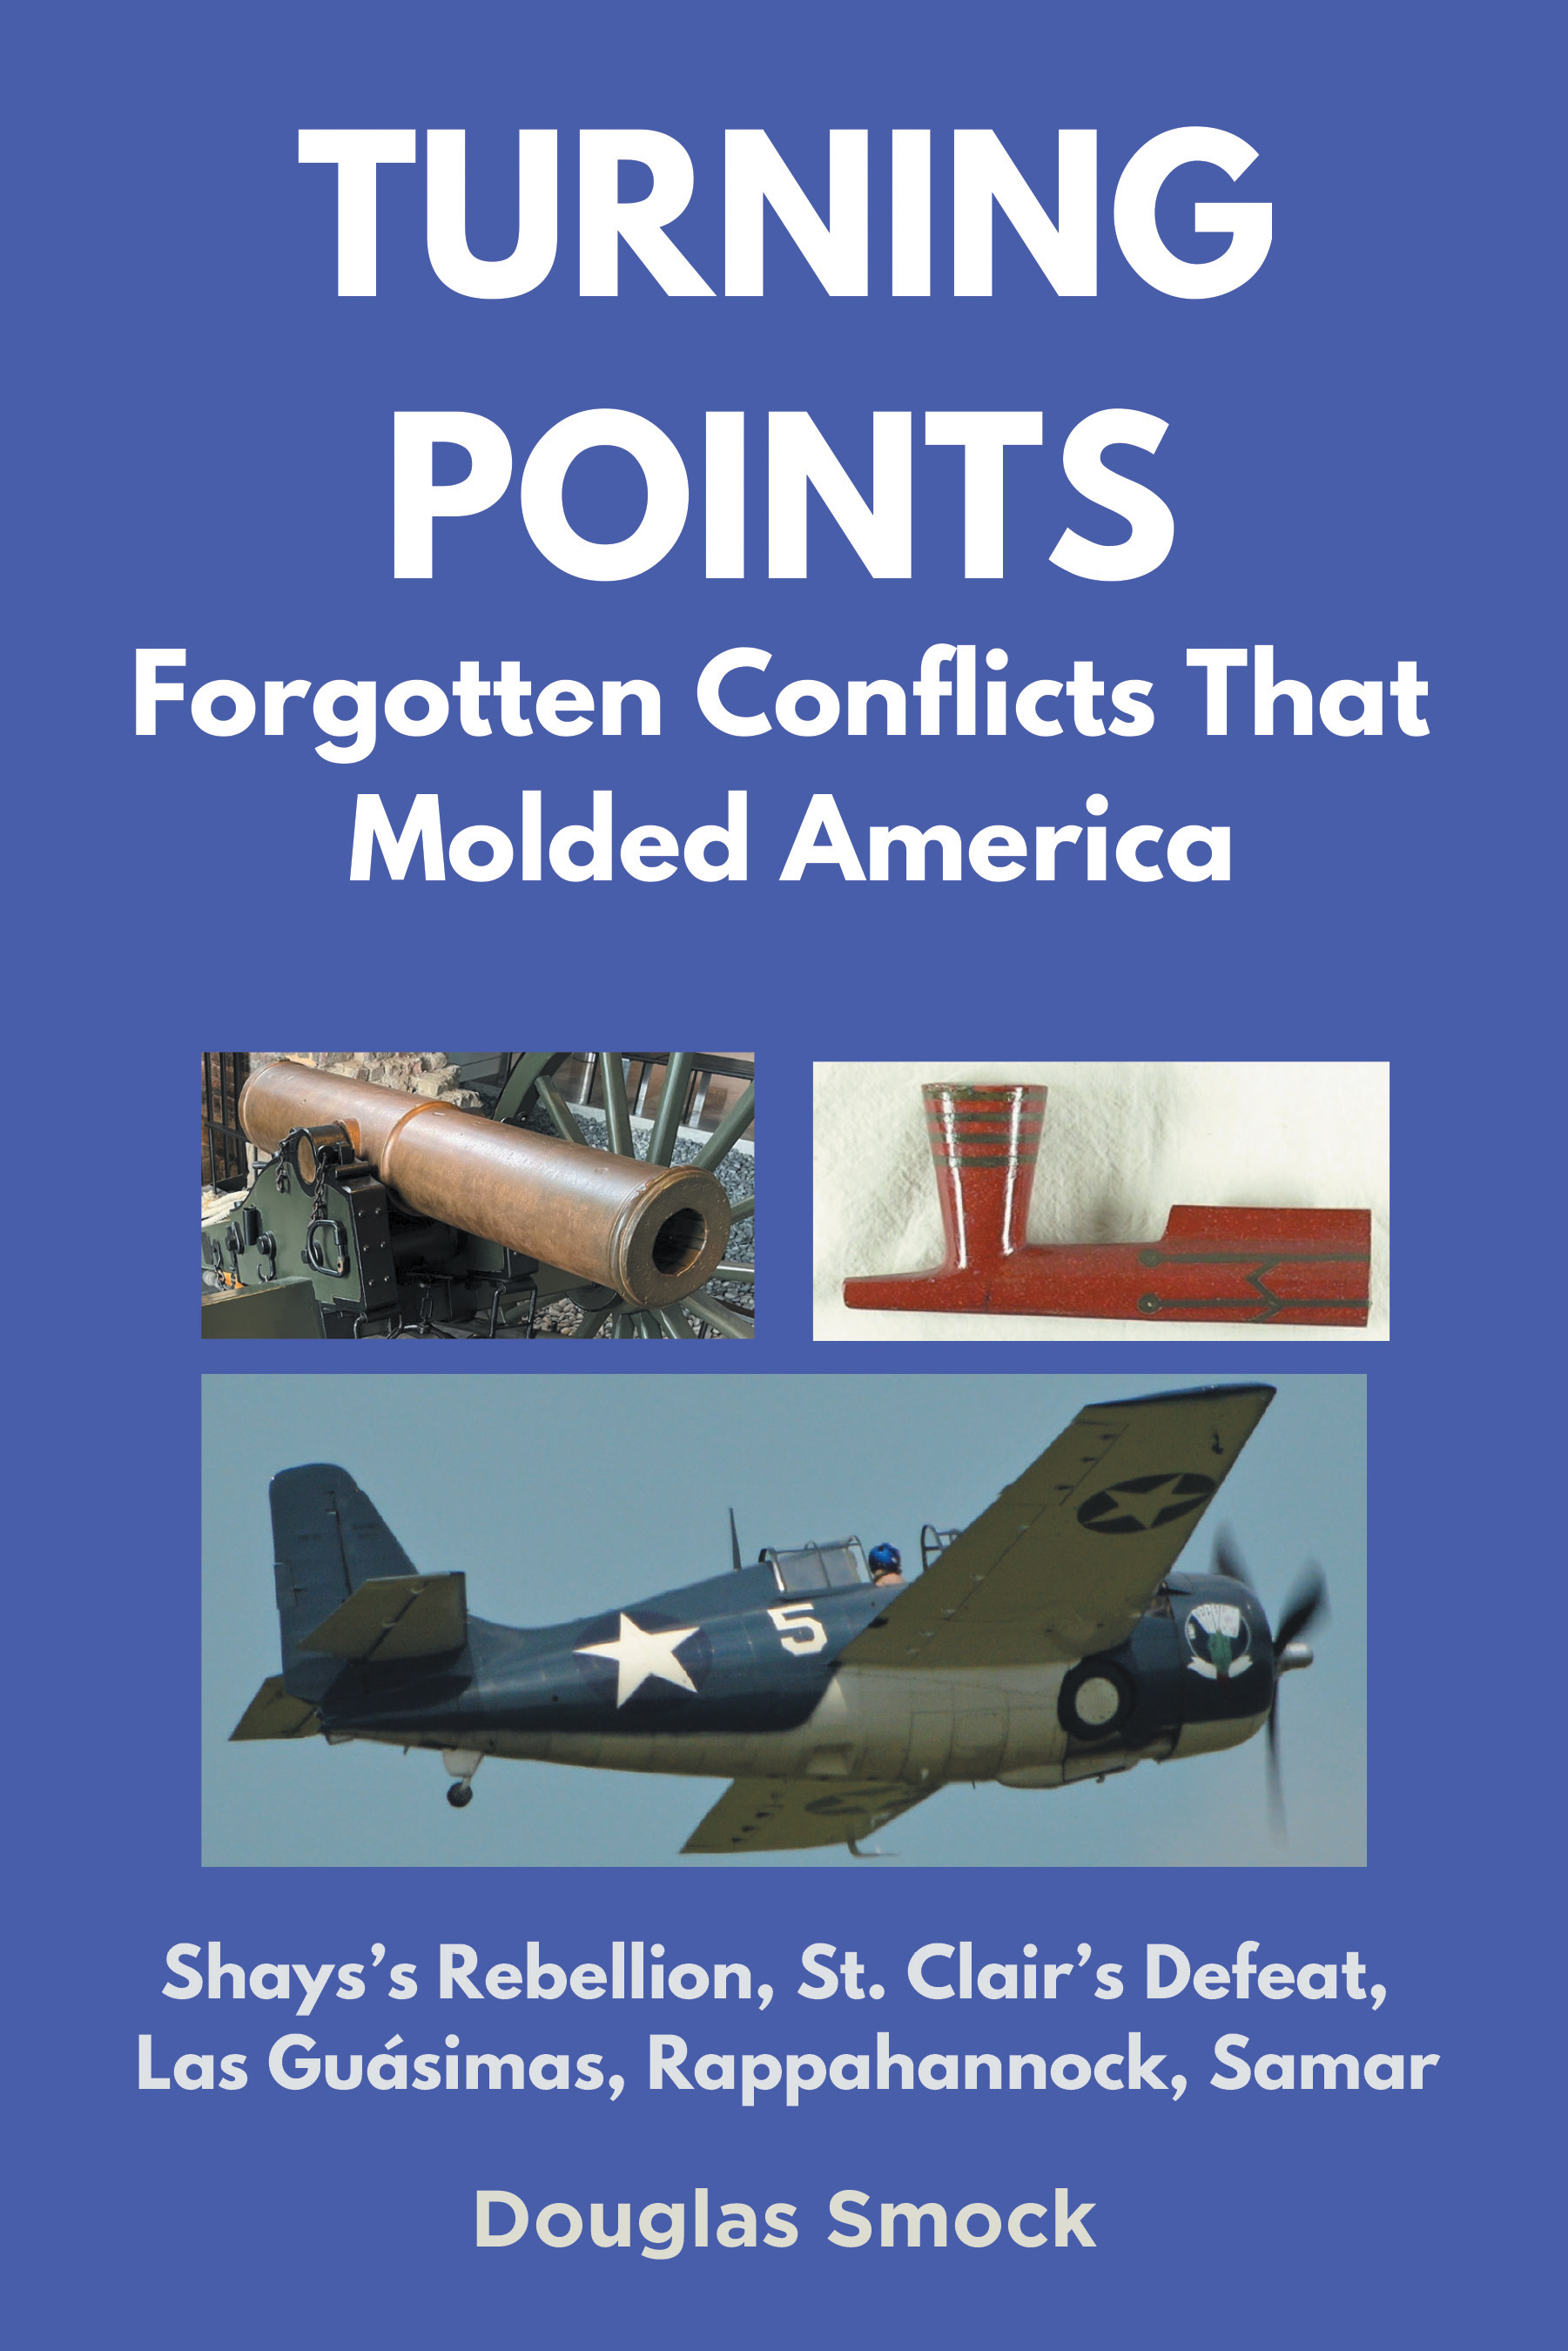 Author Douglas Smock’s New Book, "Turning Points: Forgotten Conflicts That Molded America," is a Gripping Look at Lost and Forgotten Moments of American History